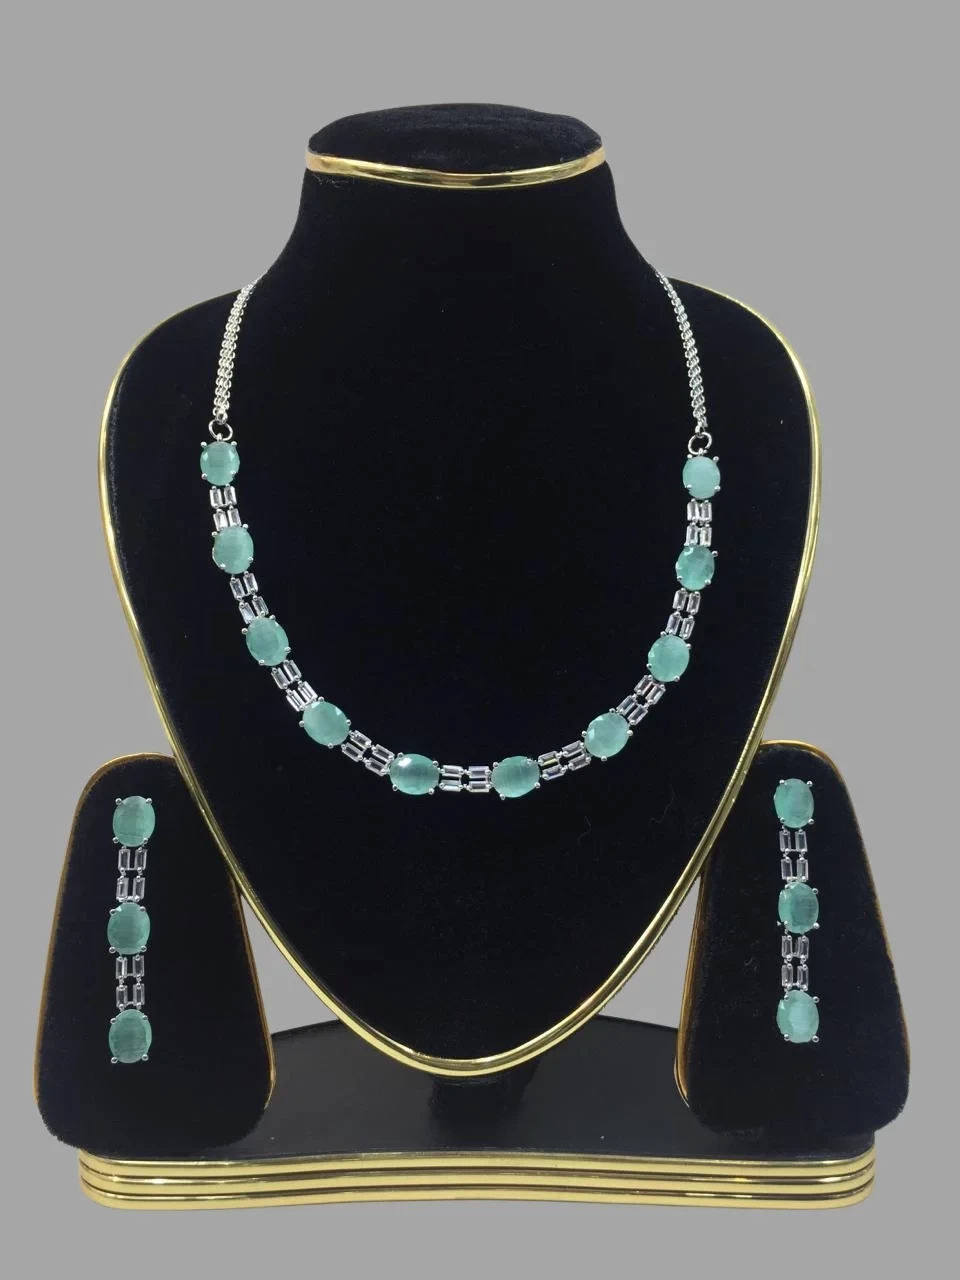 Diamond Embellished Necklace With Earrings